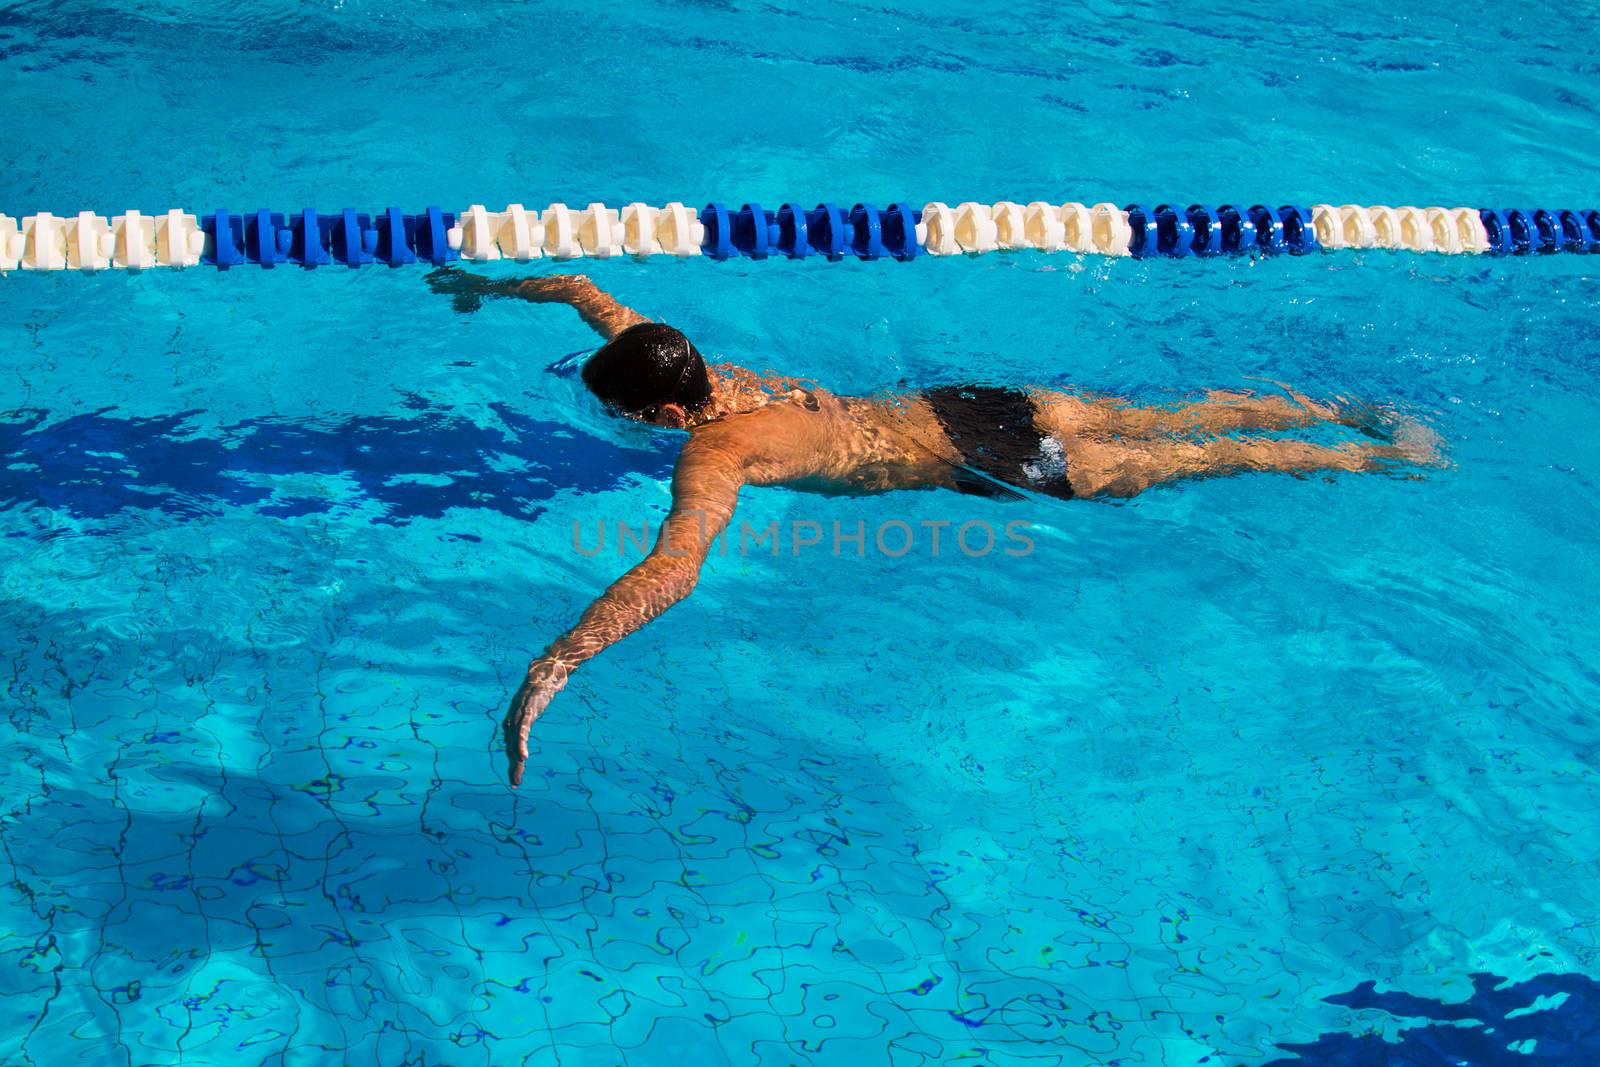 Professional swimmer dives under water in the pool - Stock Image